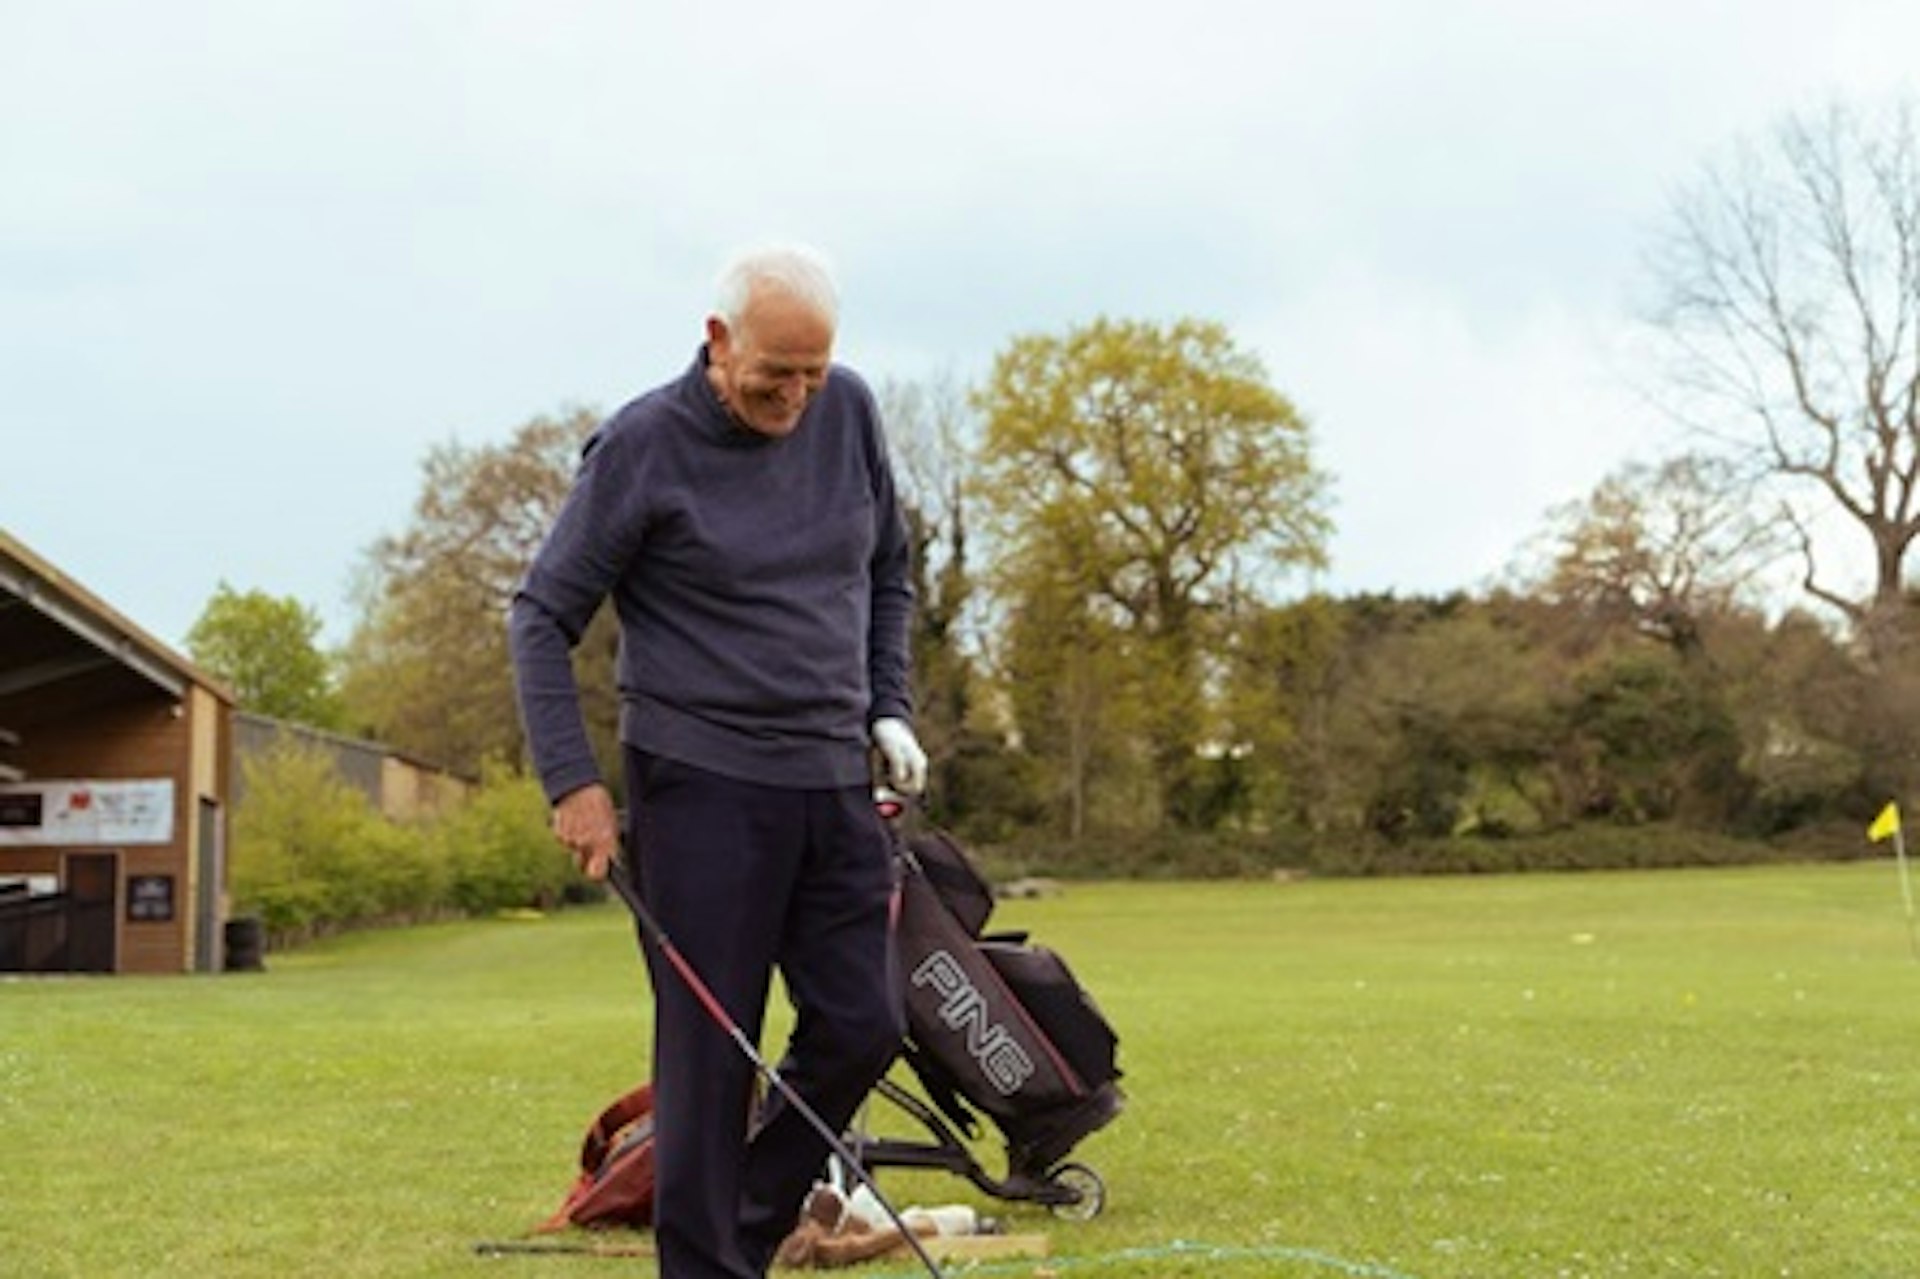 30 minute Golf Lesson for Two with a PGA Professional 1